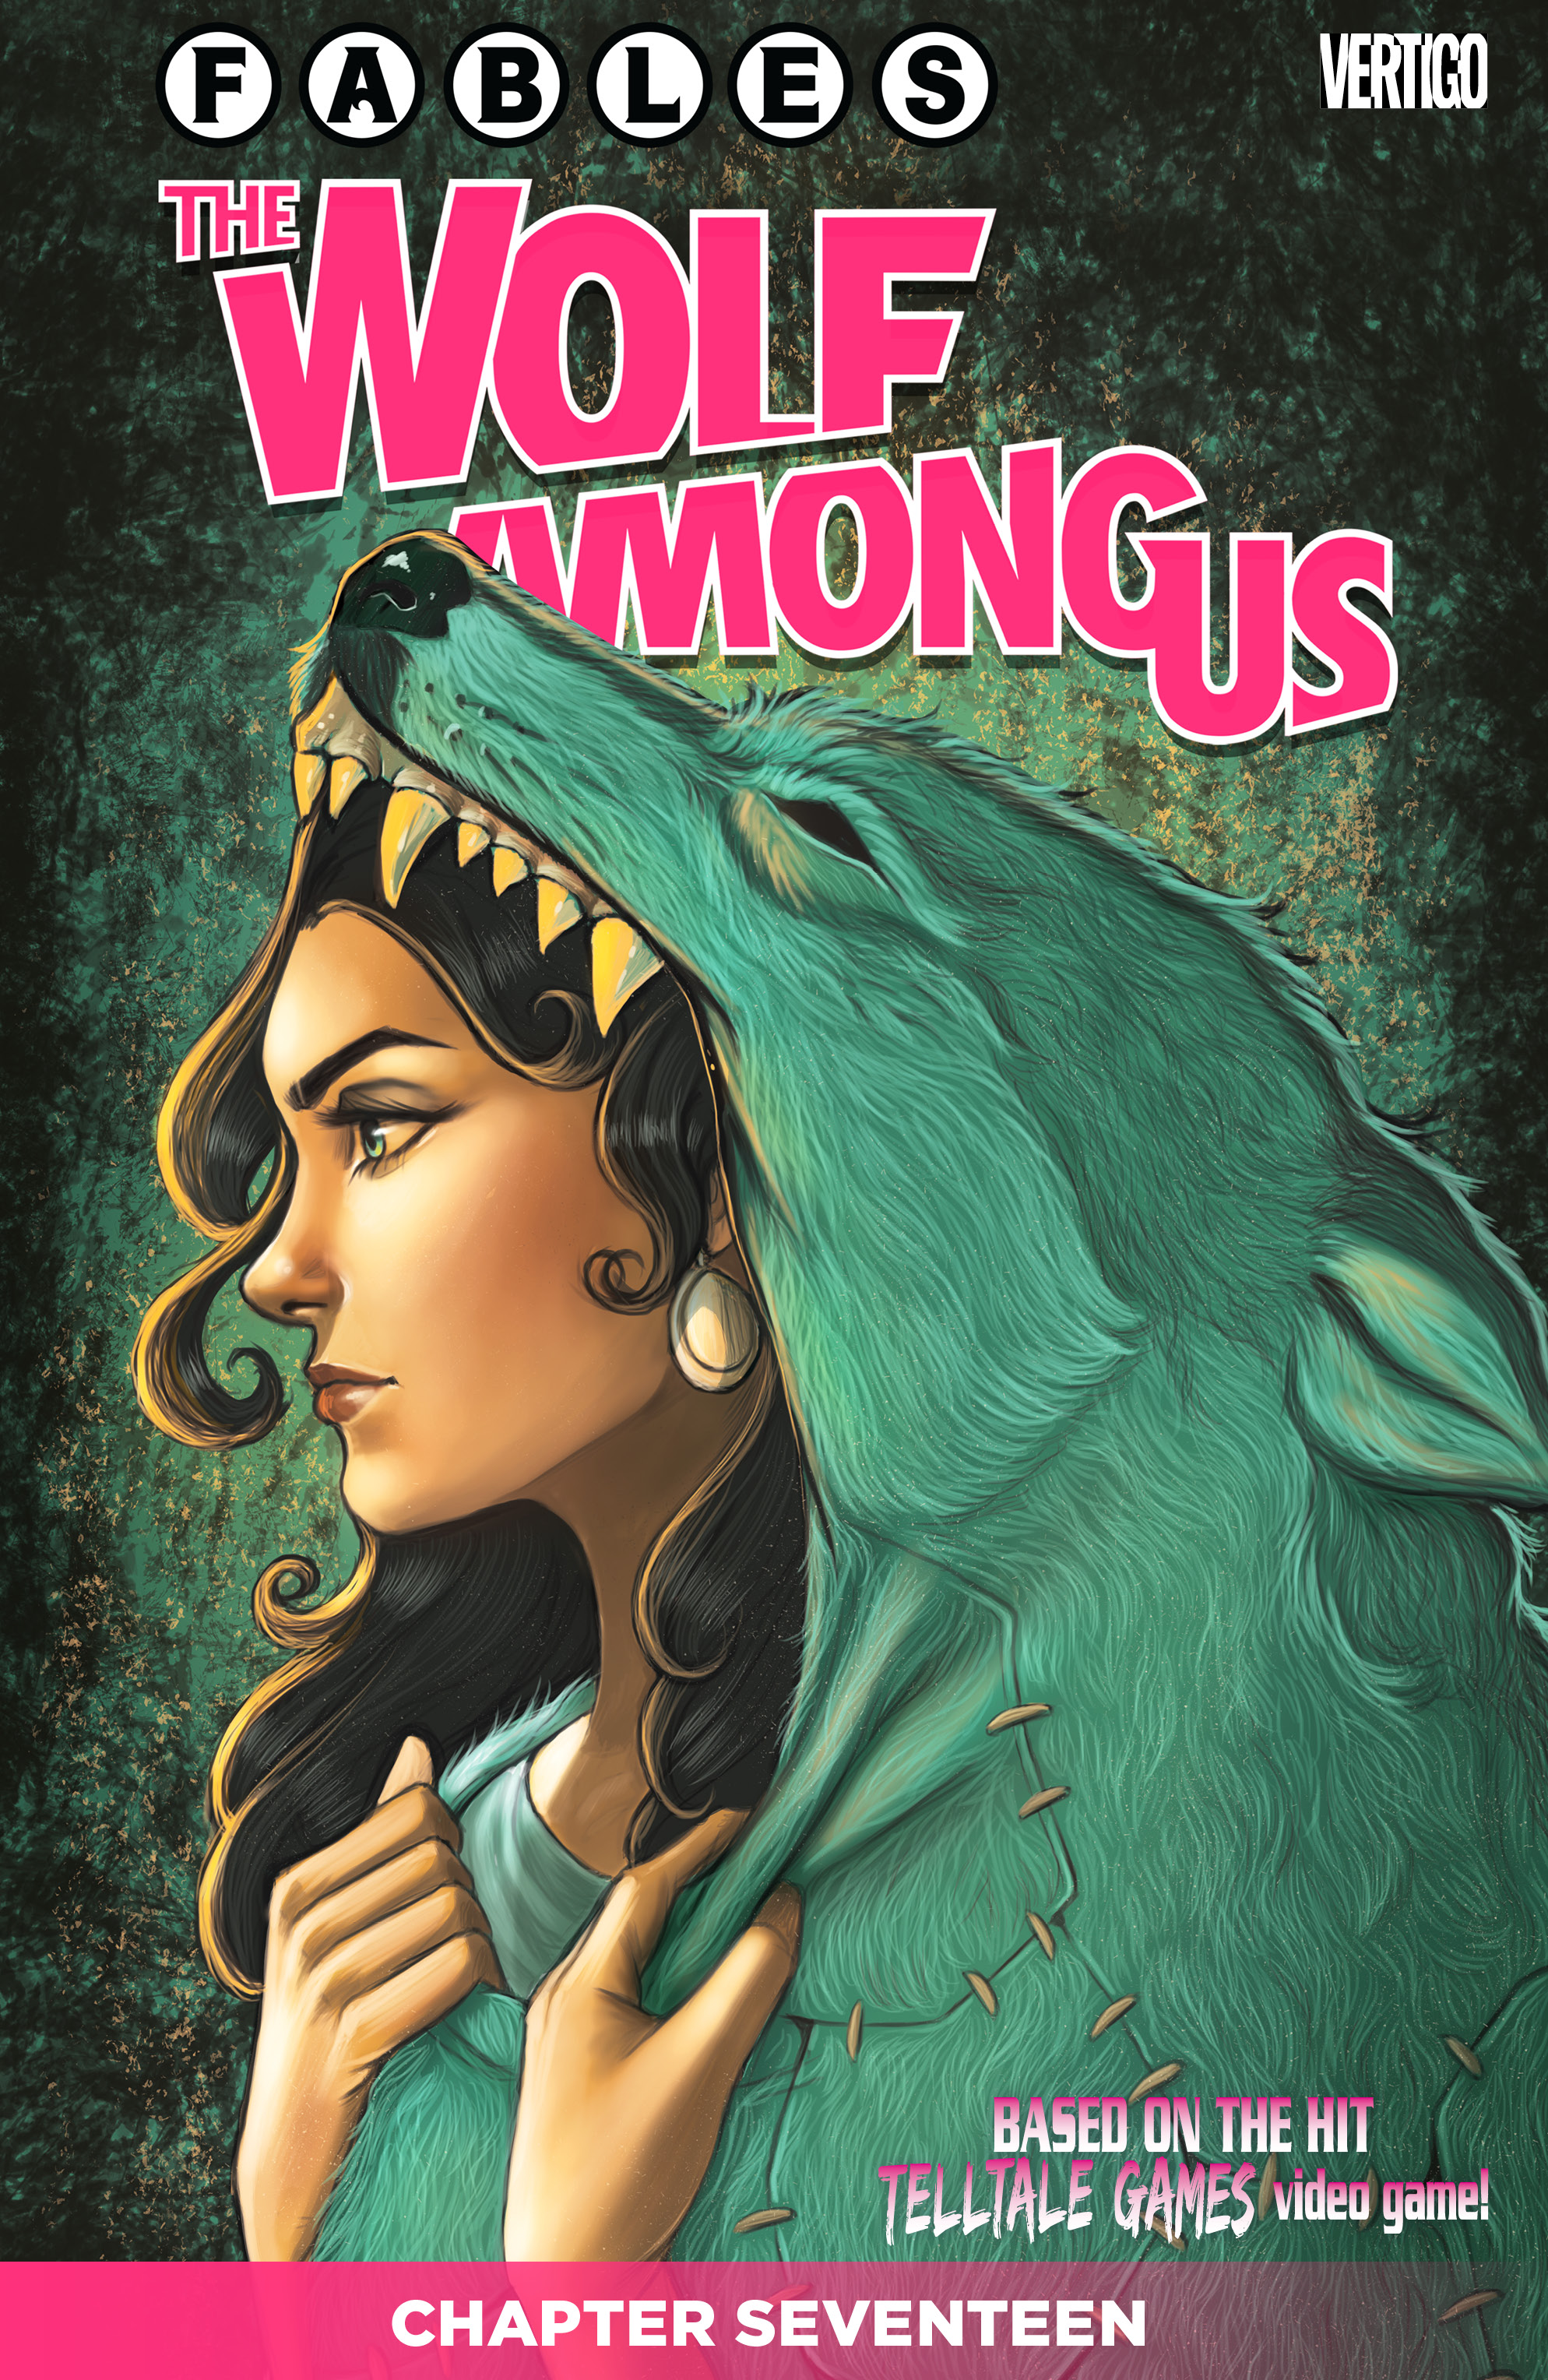 Fables: The Wolf Among Us #17 preview images